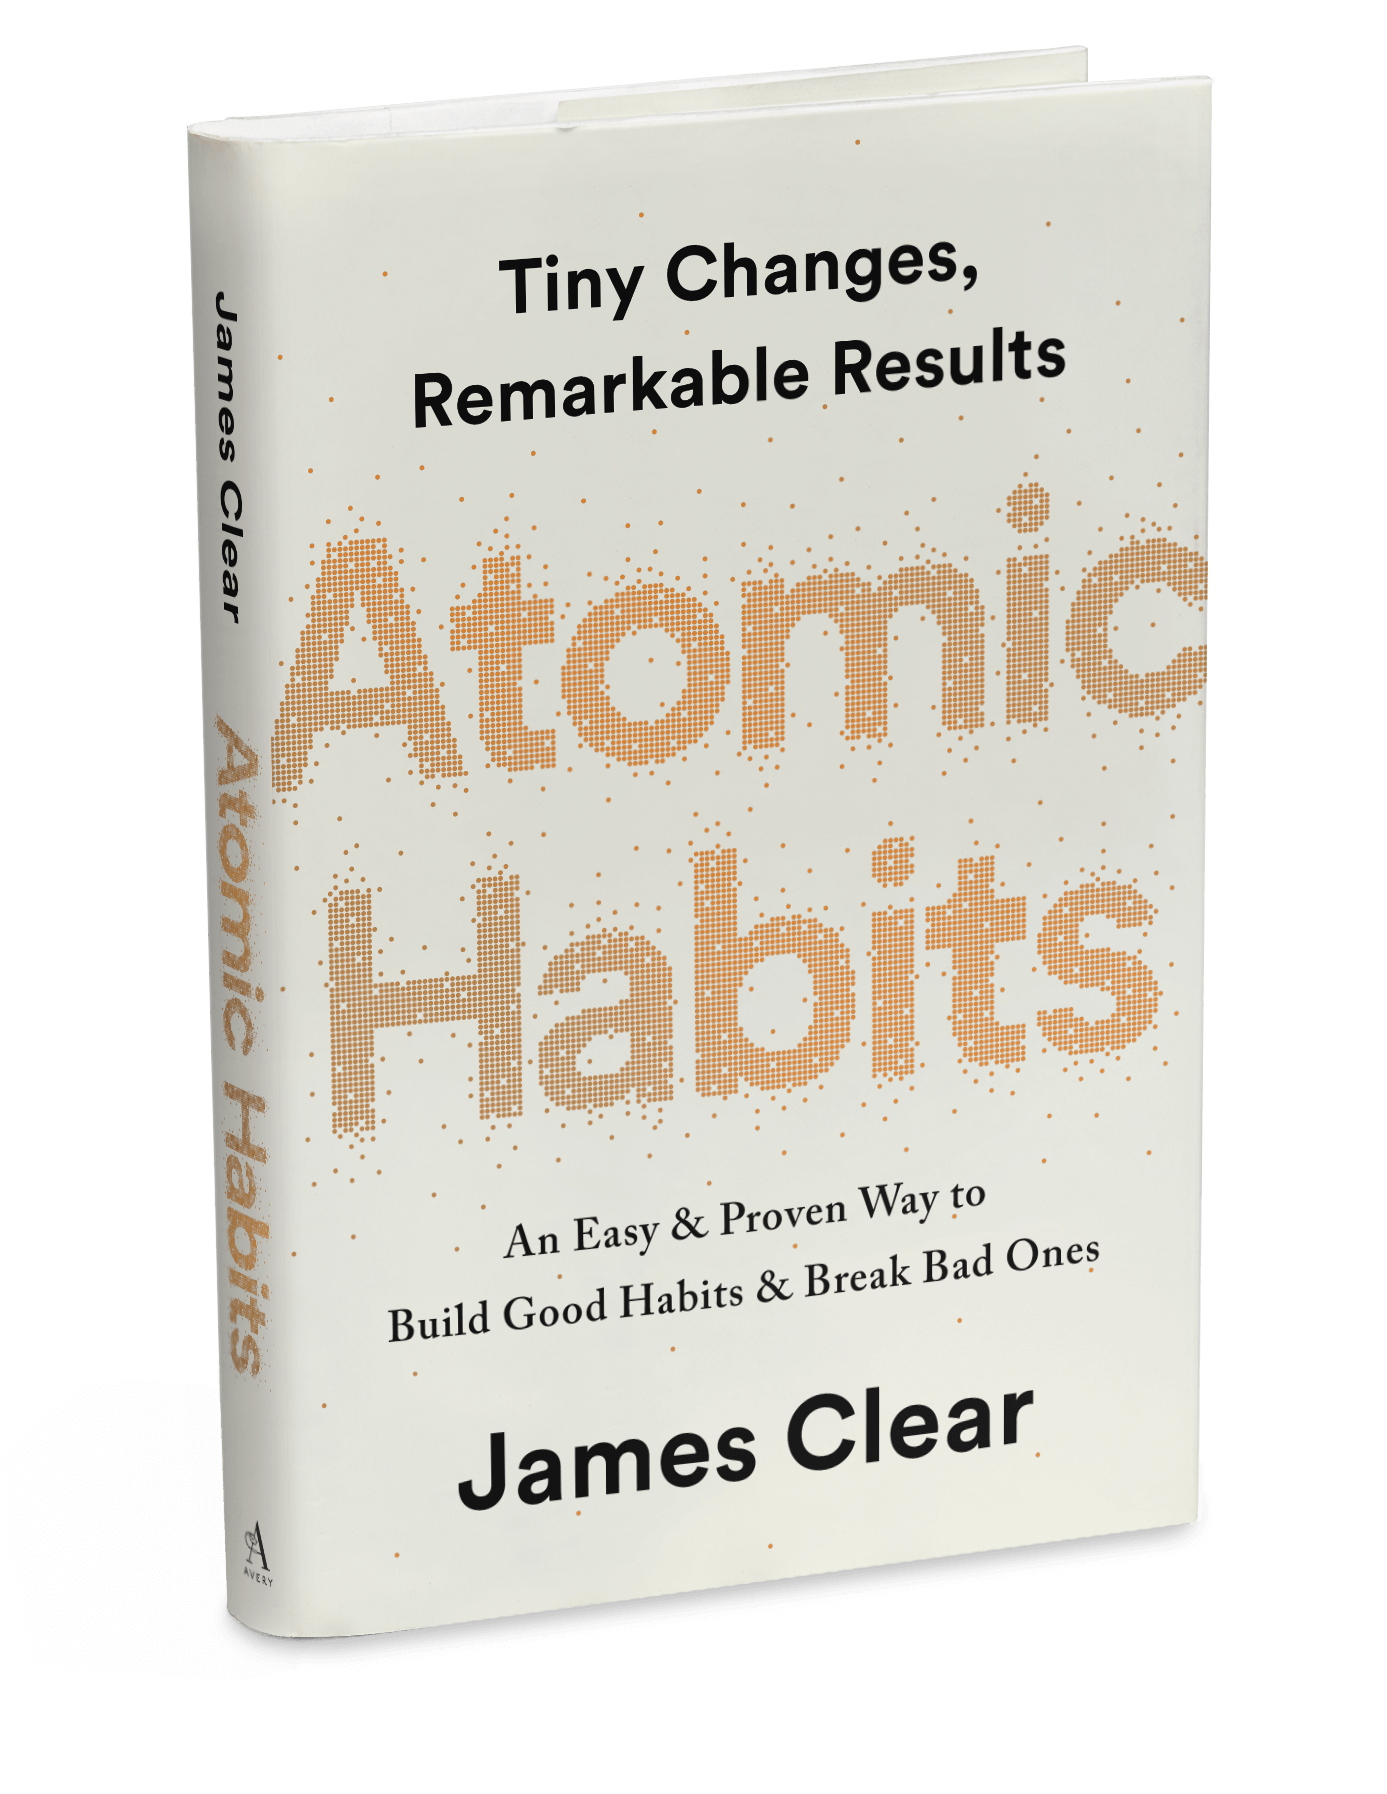 atomic-habits-a-book-review-writings-of-a-mid-life-man